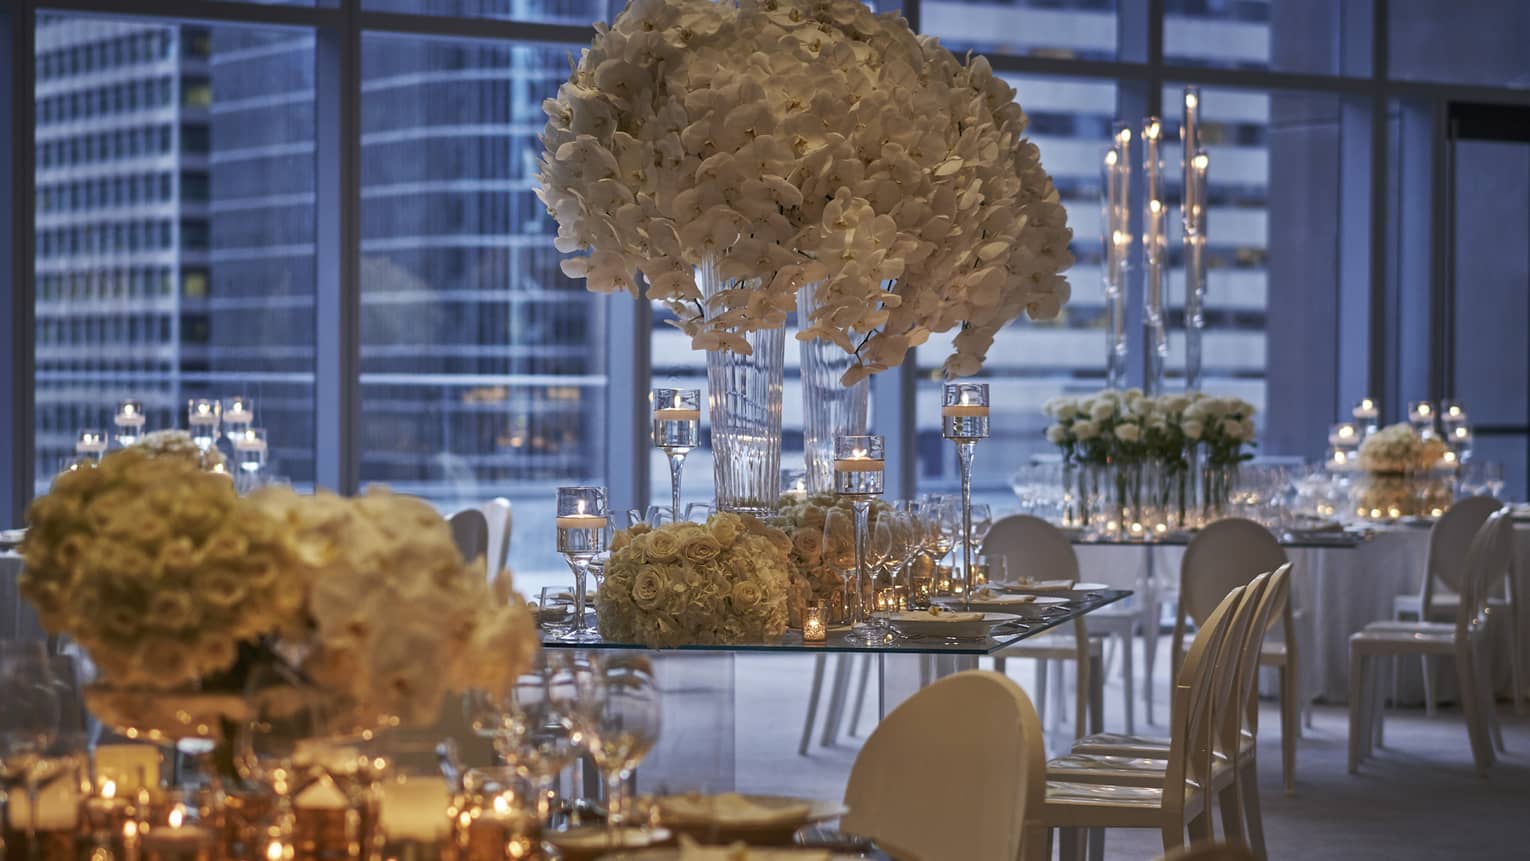 Glass tables with white chairs surrounding them, and many floral arrangements and candles placed on top.